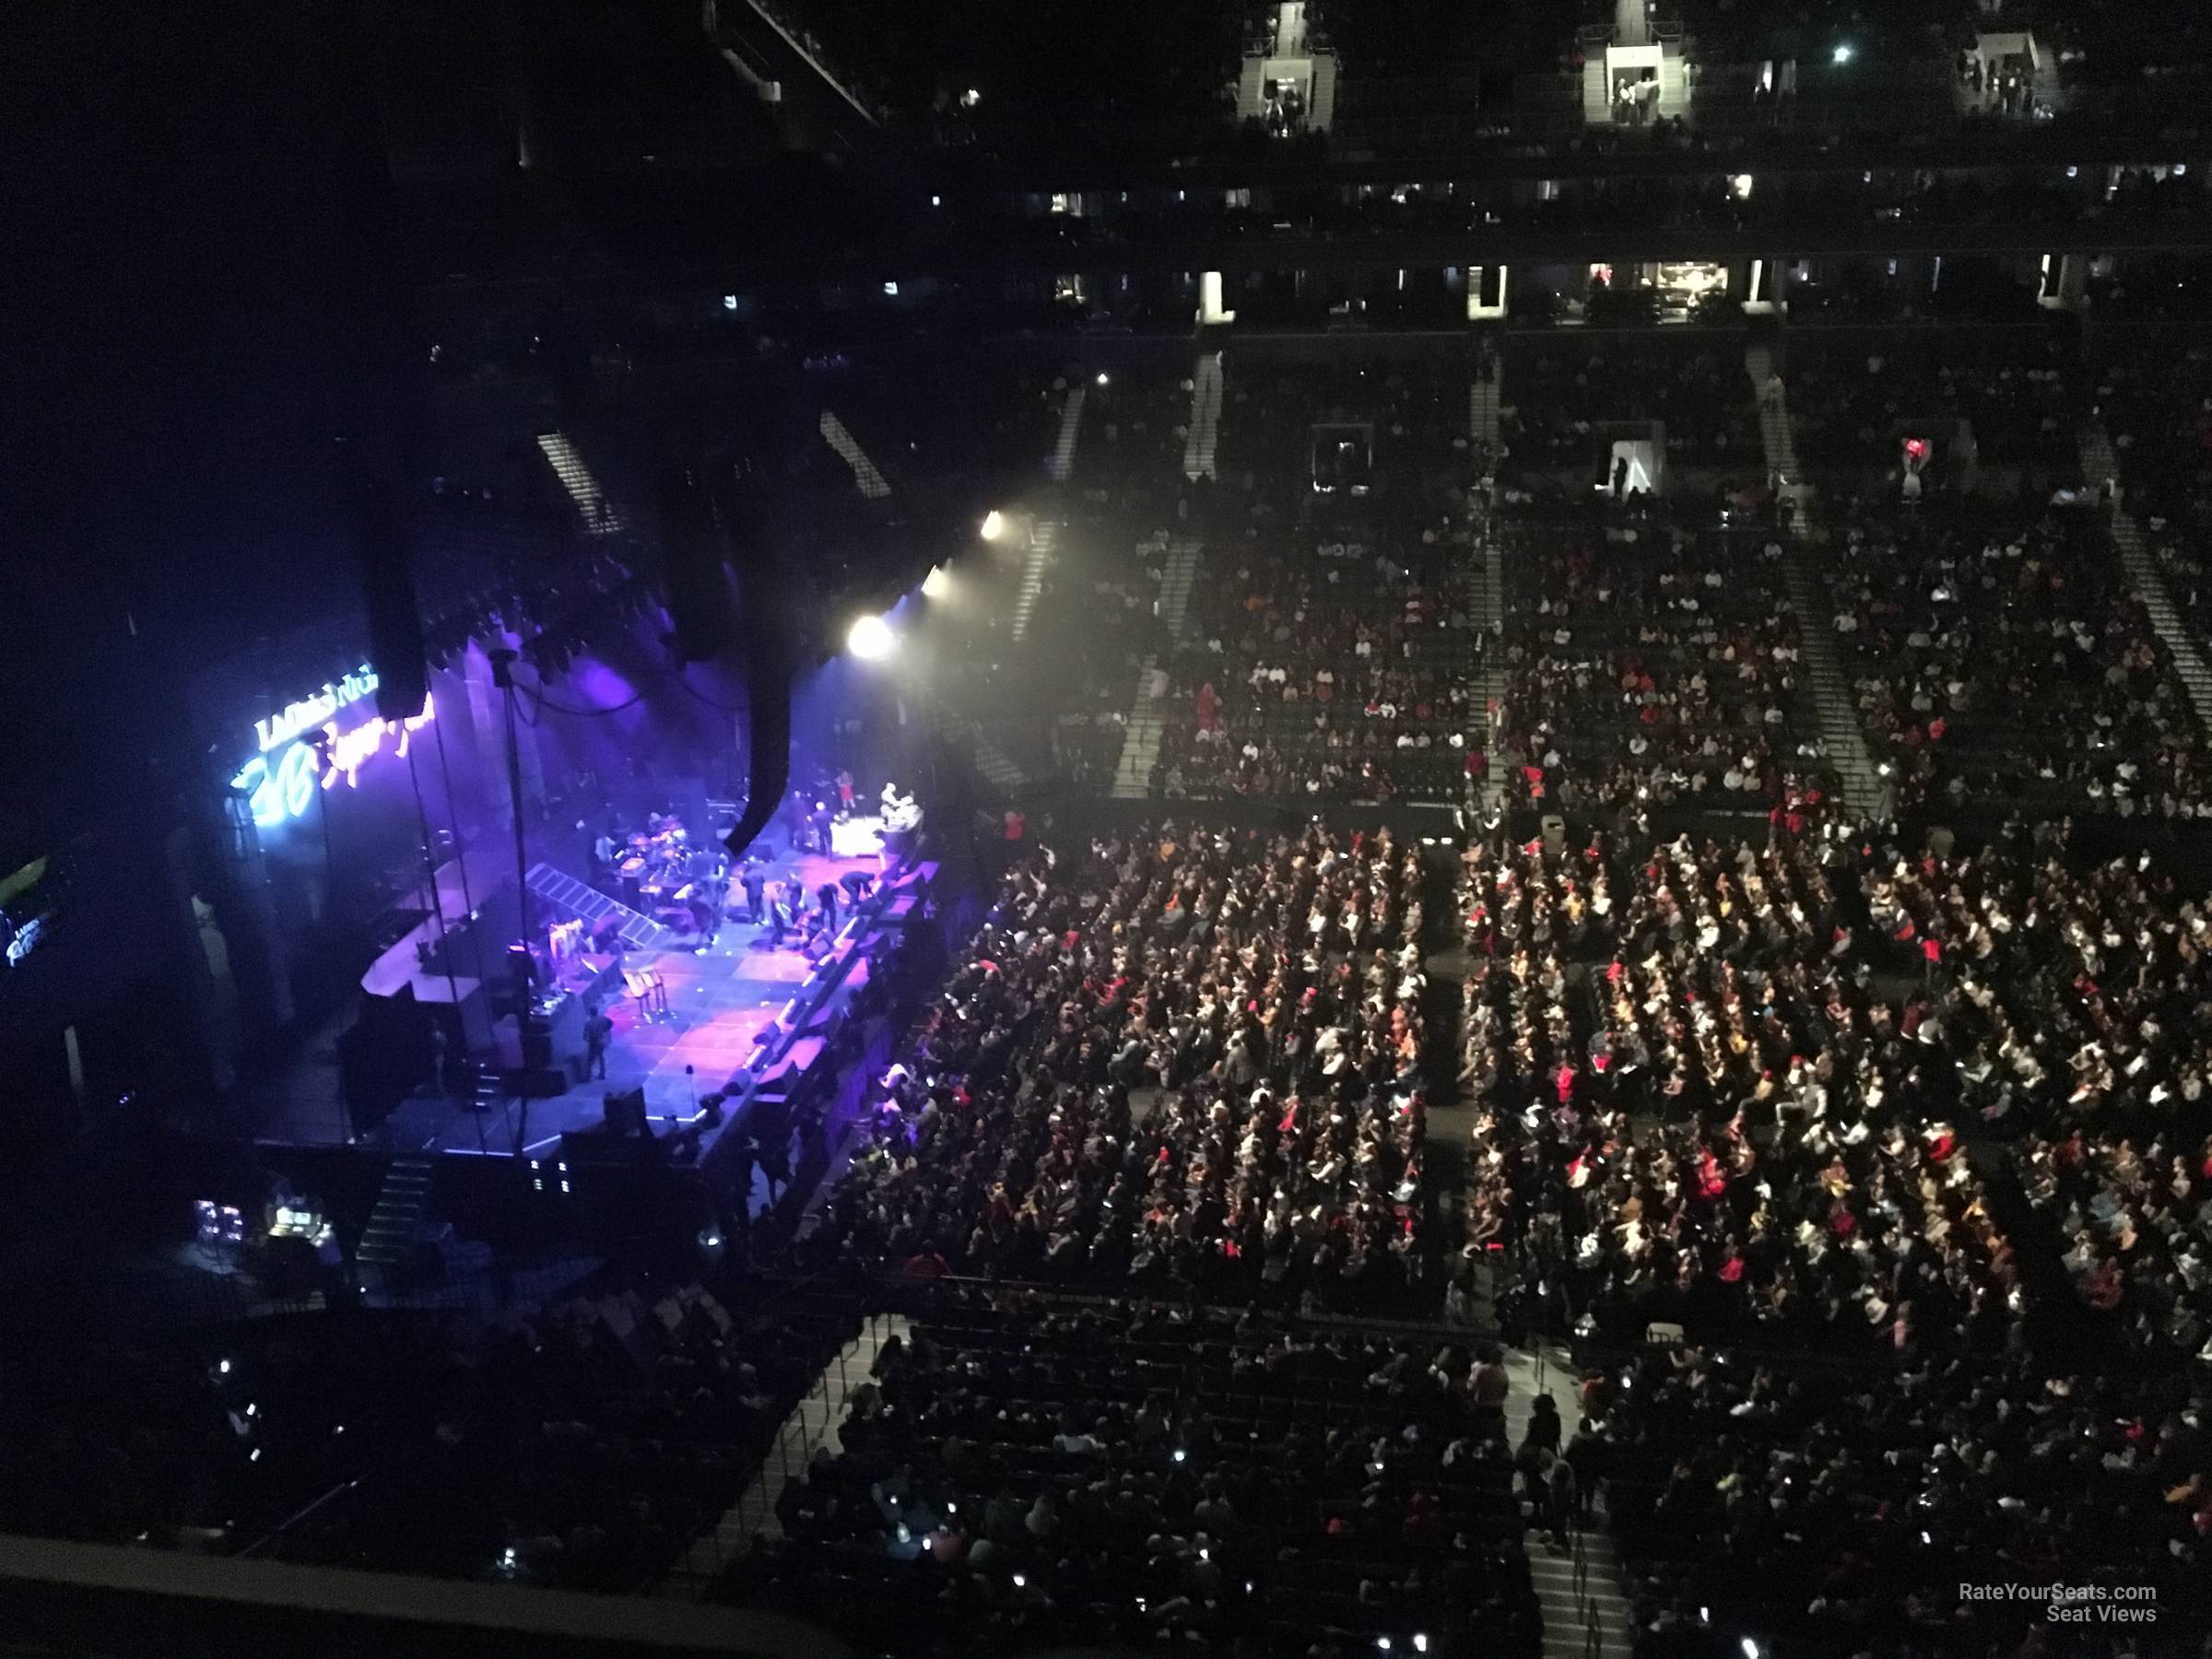 Section 225 at Barclays Center for Concerts